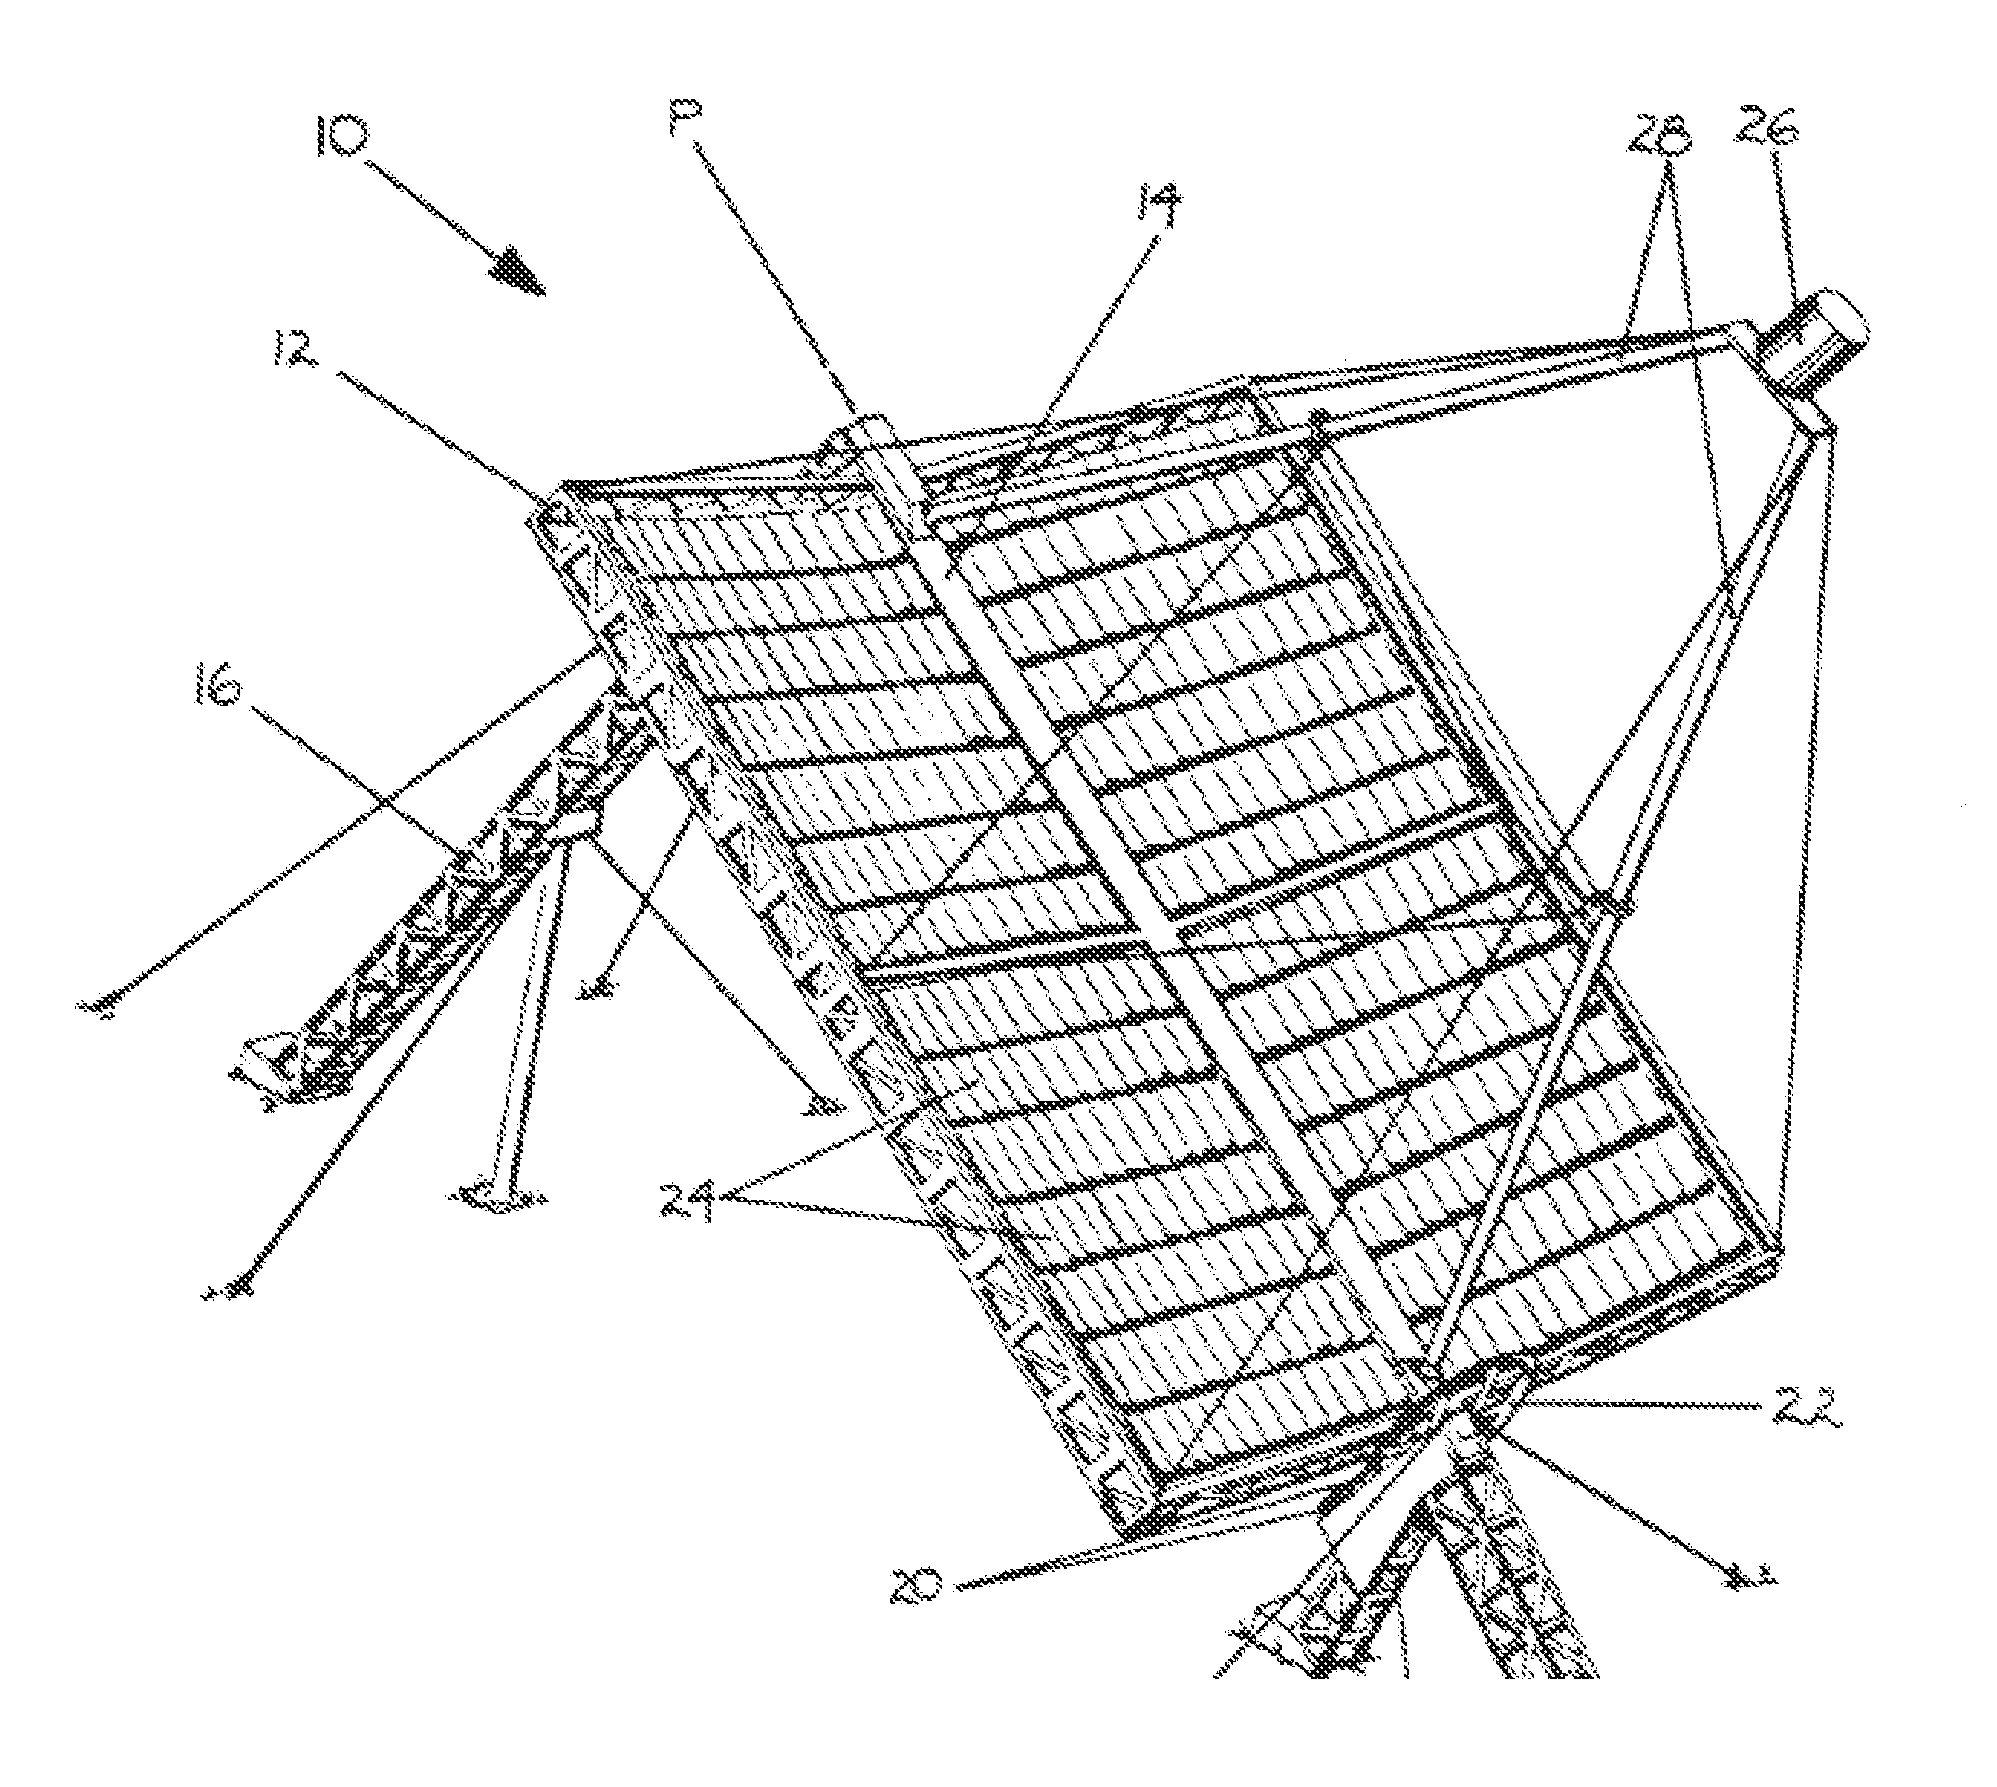 Solar concentrator with induced dipole alignment of pivoted mirrors